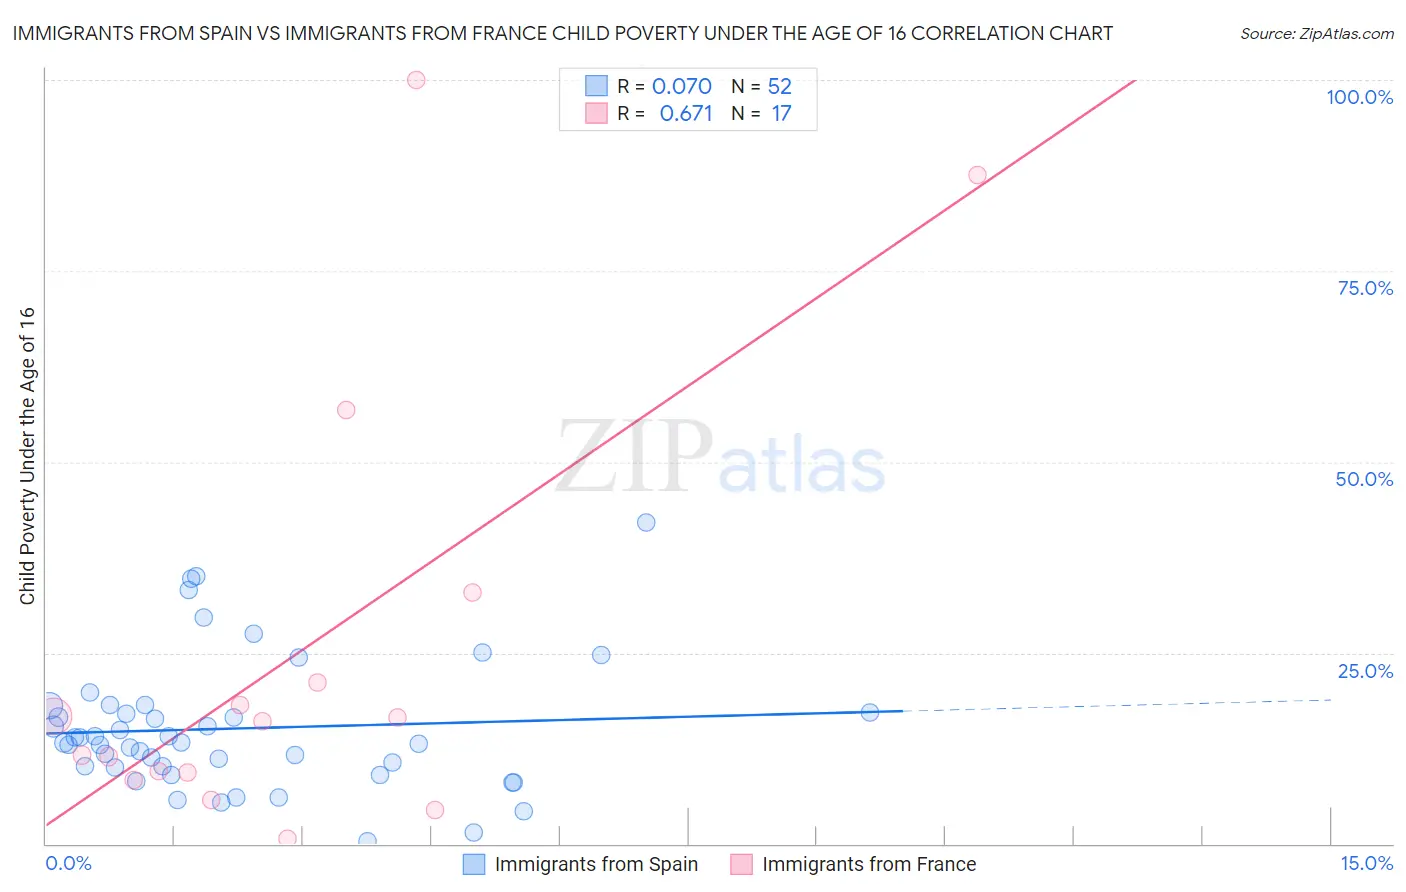 Immigrants from Spain vs Immigrants from France Child Poverty Under the Age of 16